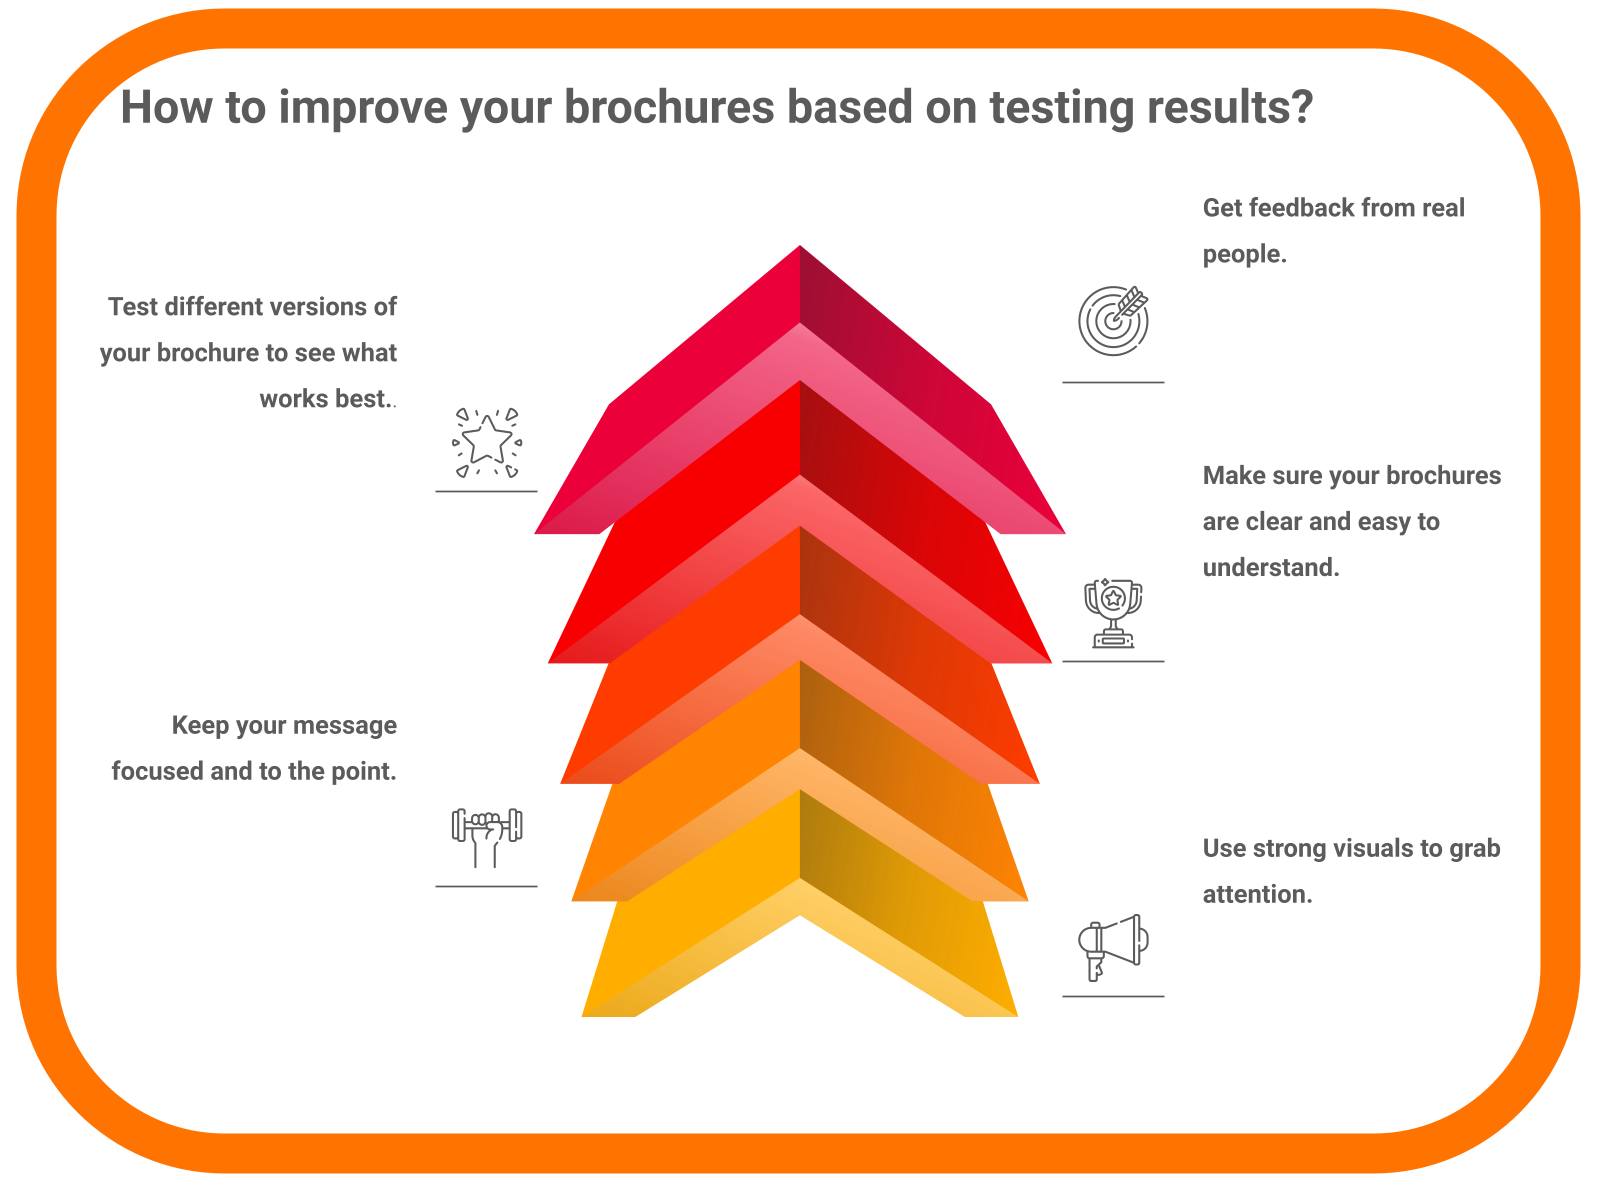 How to improve your brochures based on testing results?